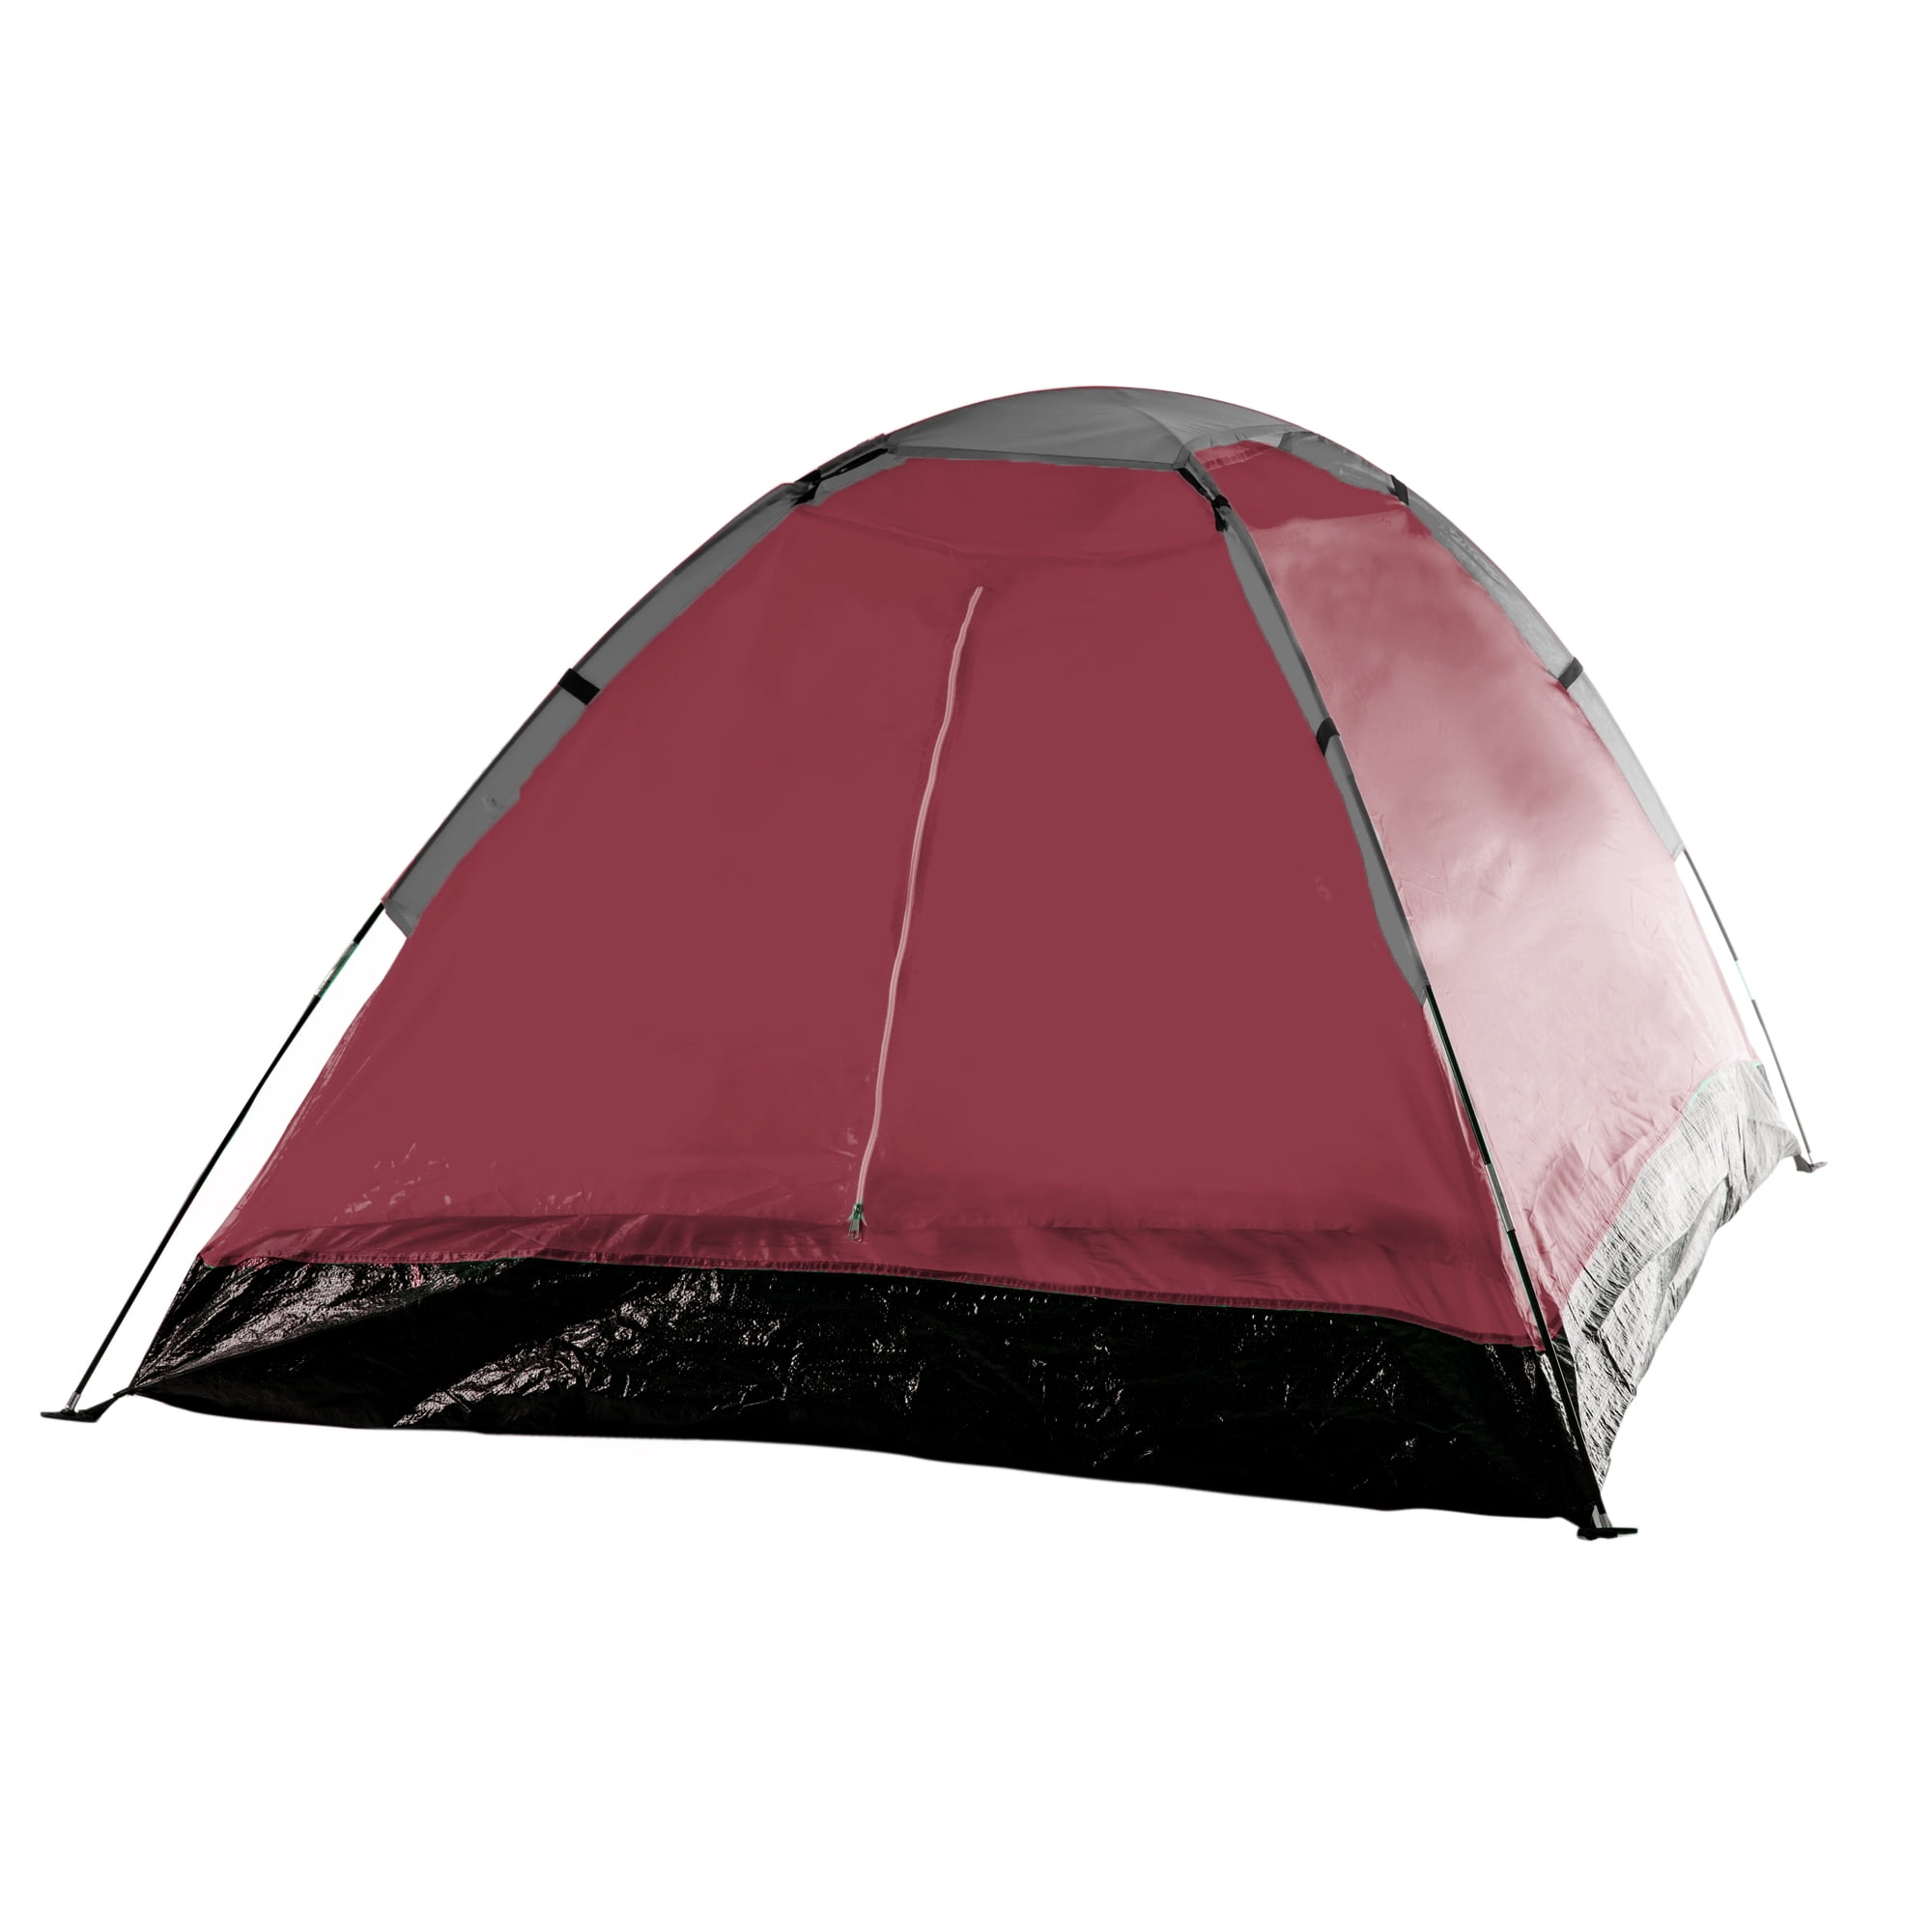 2-Person Dome Tent for Camping - Rain Fly, Water Resistant Material with  Polyurethane Coating - Great Addition to Camping Accessories by Wakeman 